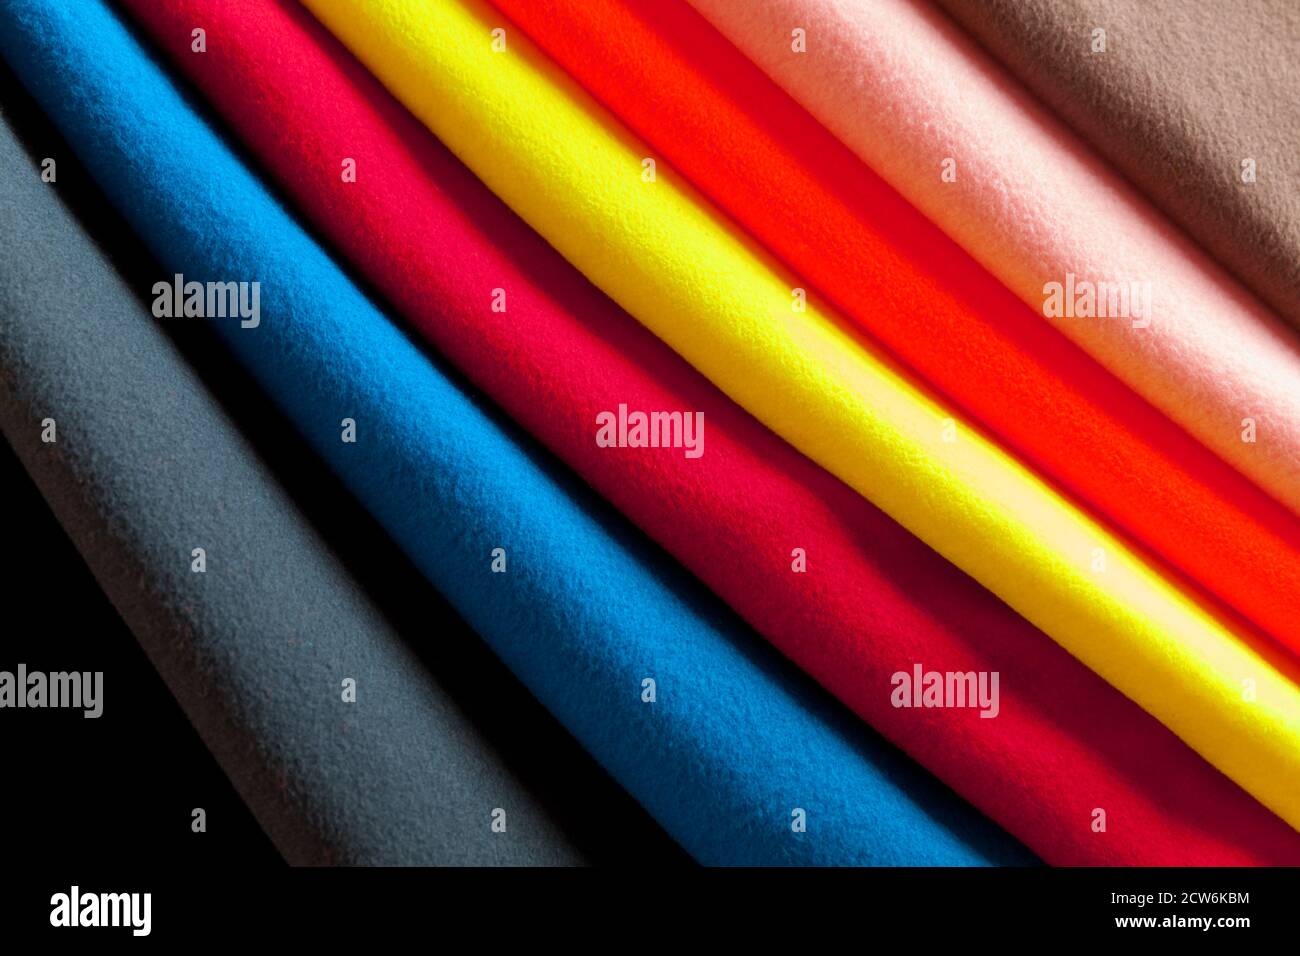 Background texture of colorful fleece, soft napped insulating fabric made of polyester Stock Photo